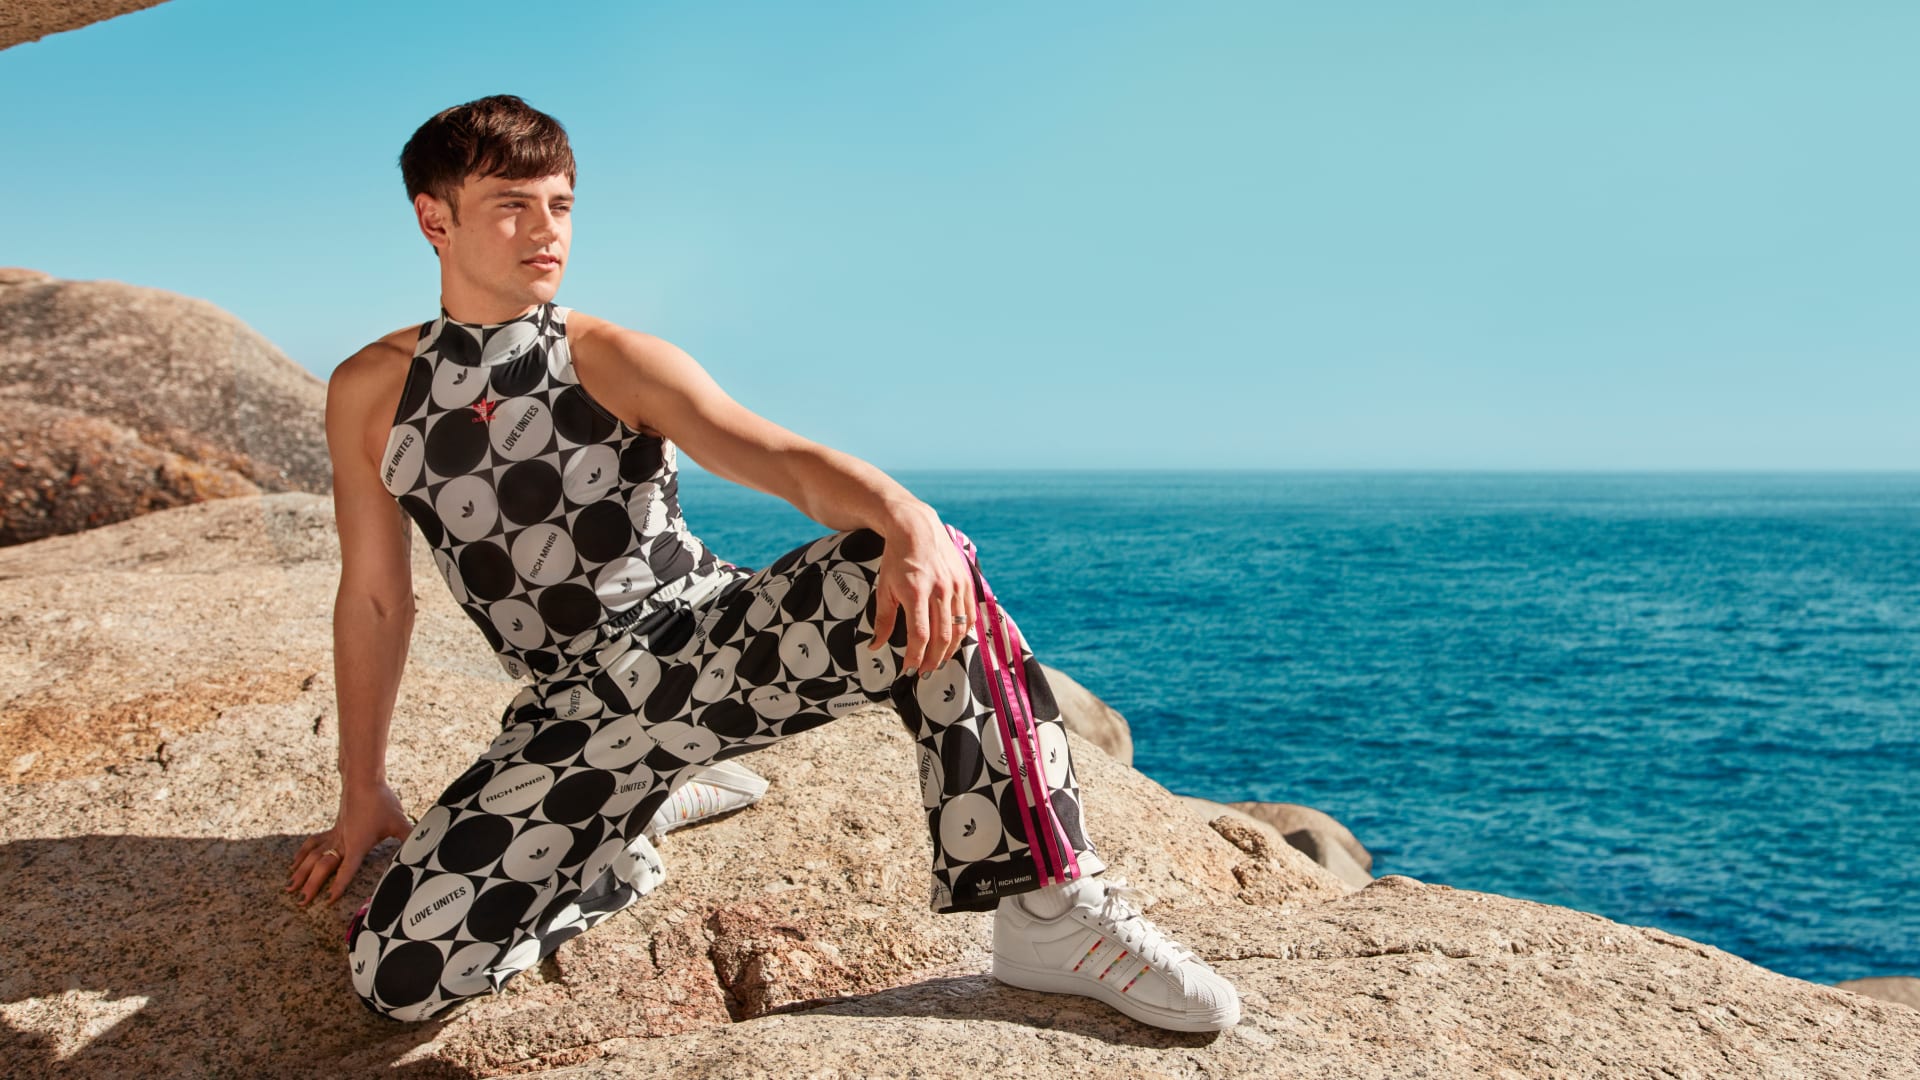 Tom Daley poses on a large stone overlooking an endless blue sky and ocean, styled in apparel from the adidas x Rich Mnisi Pride Collection.